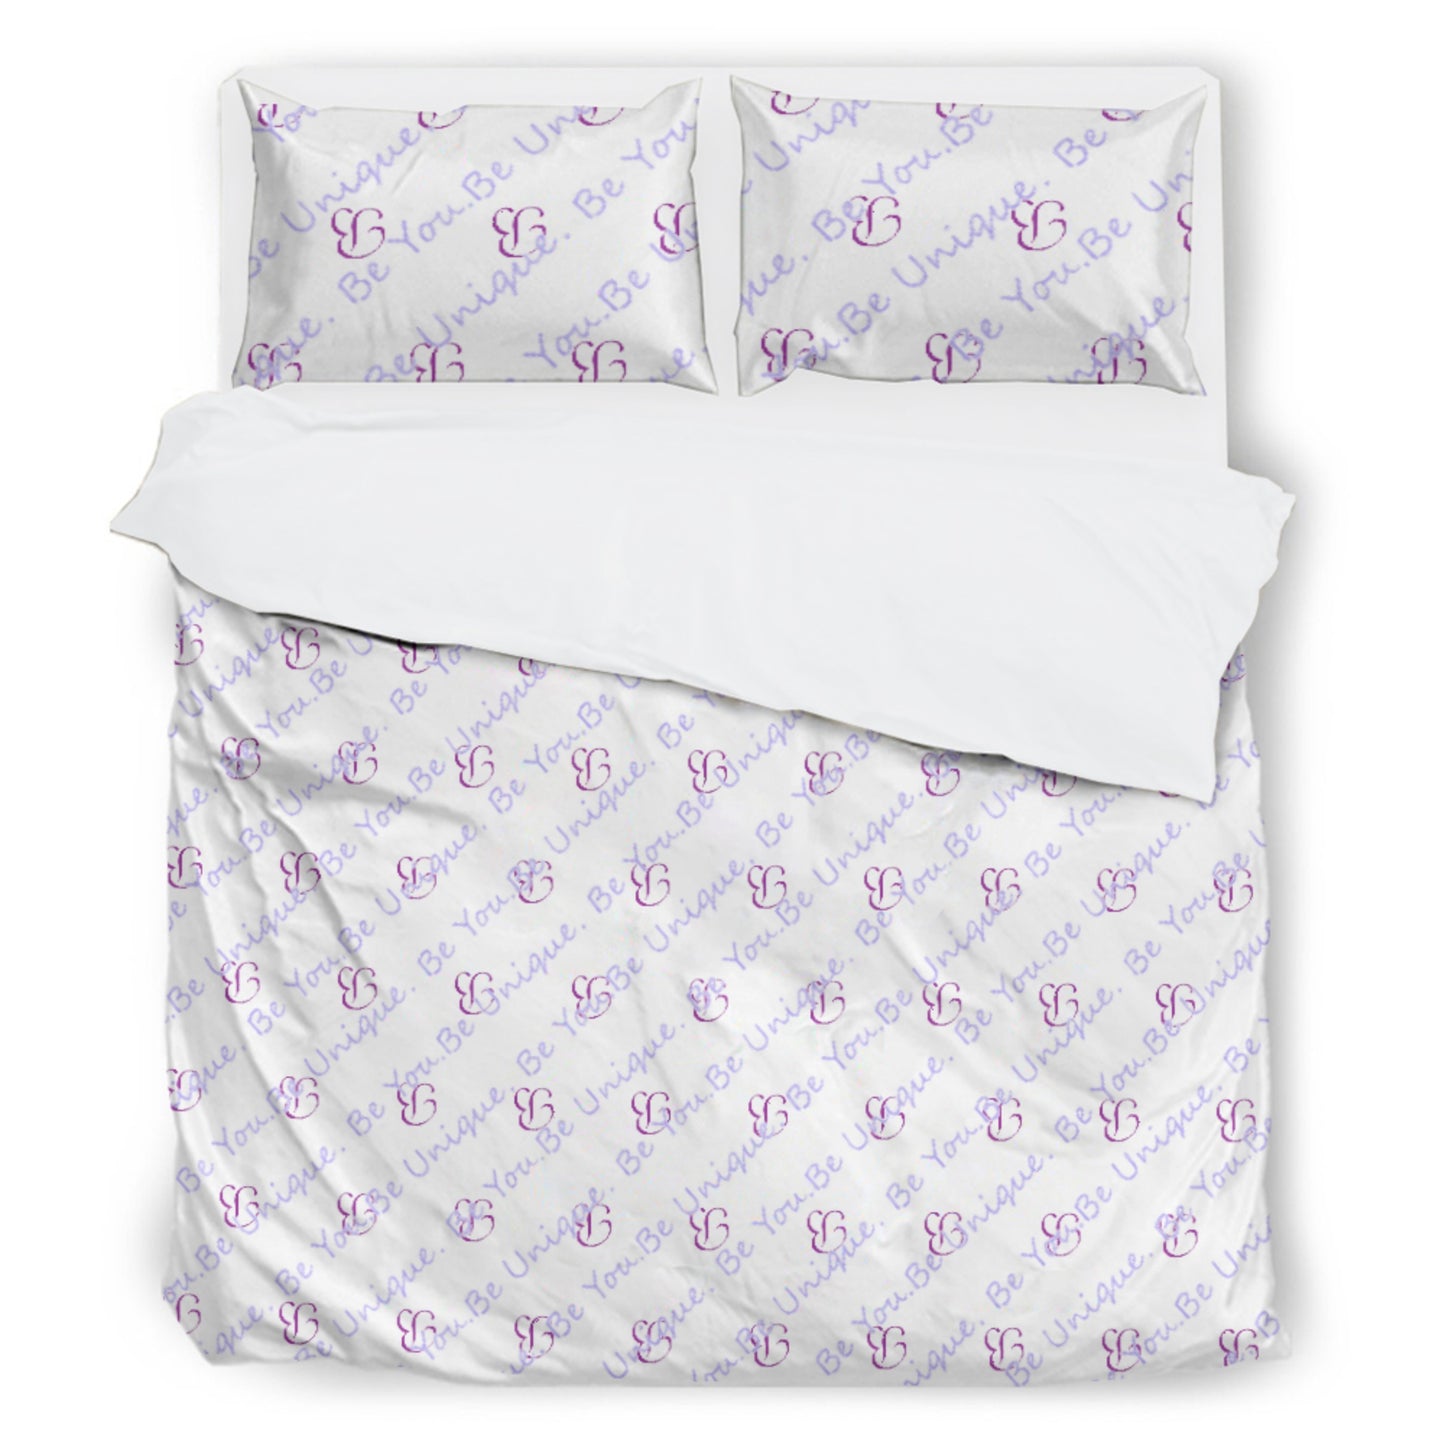 EtherealBe Cozy Down Comforter Set With Pillow Cases - Be Unique. Be You.